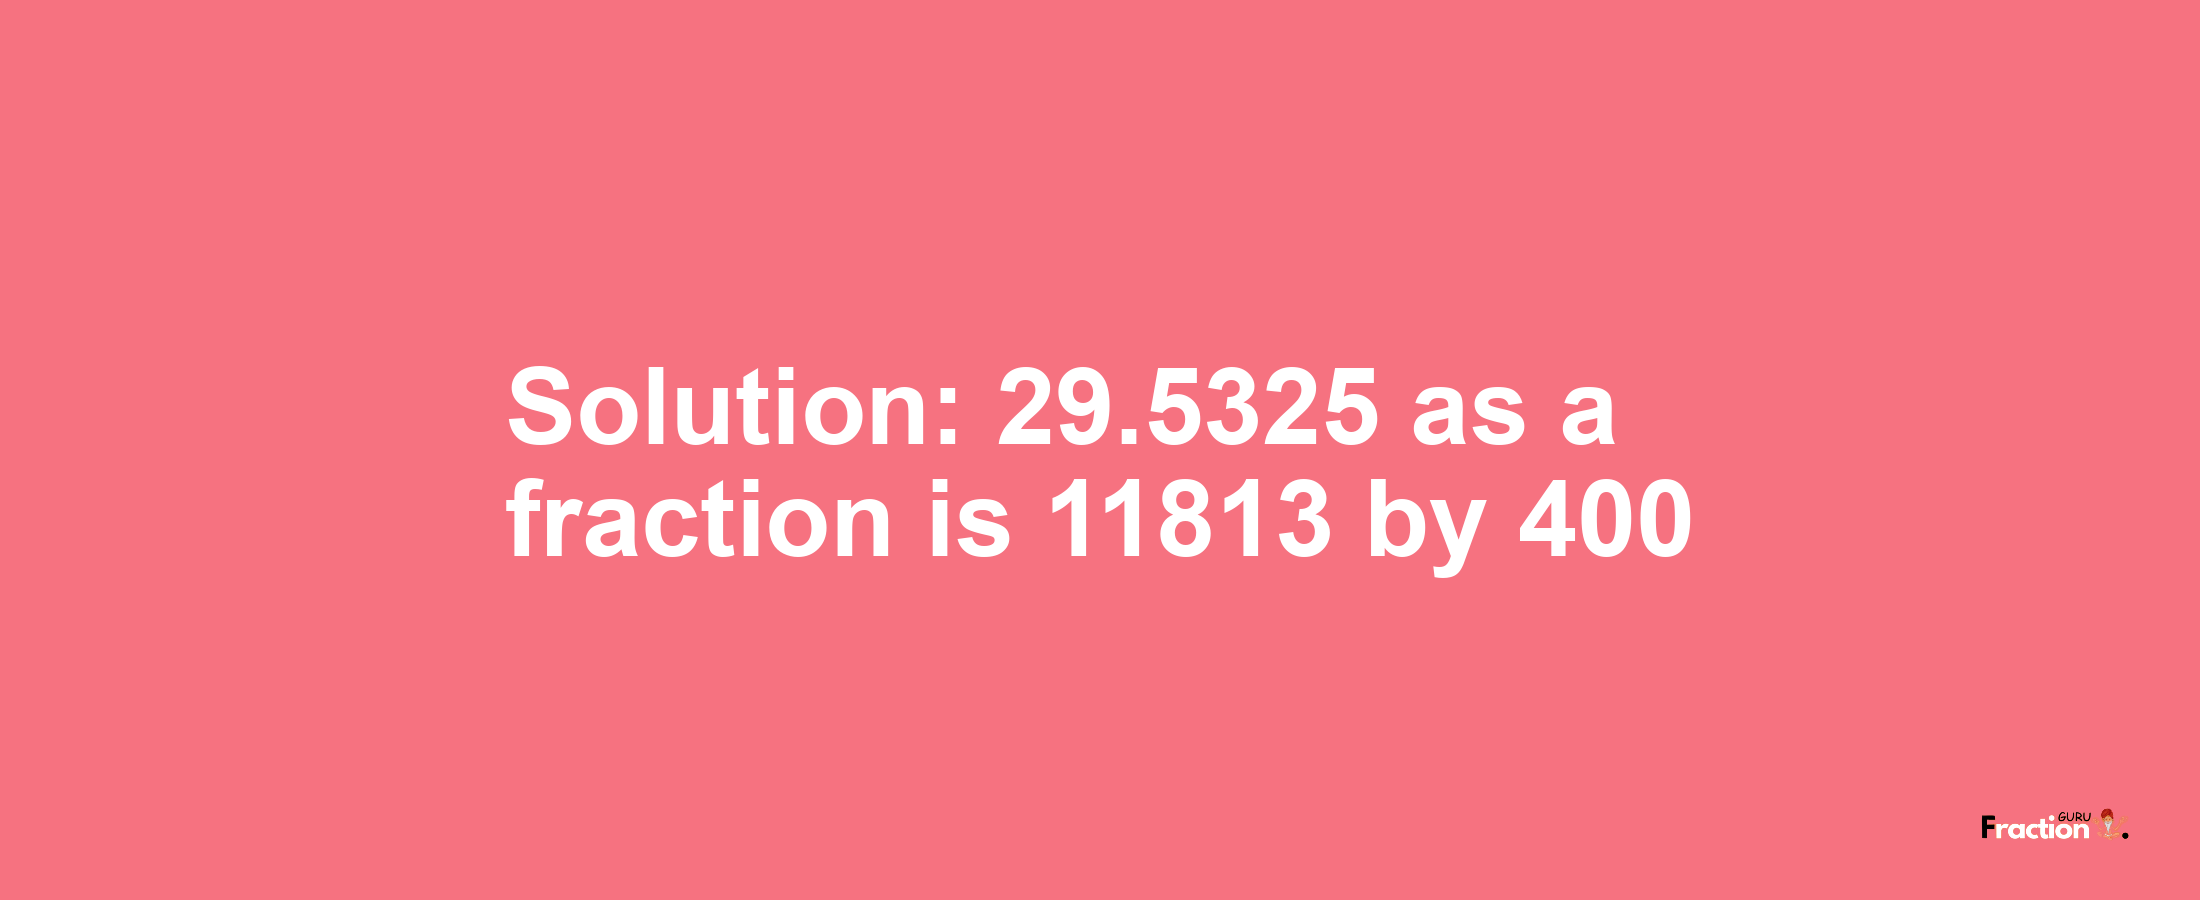 Solution:29.5325 as a fraction is 11813/400